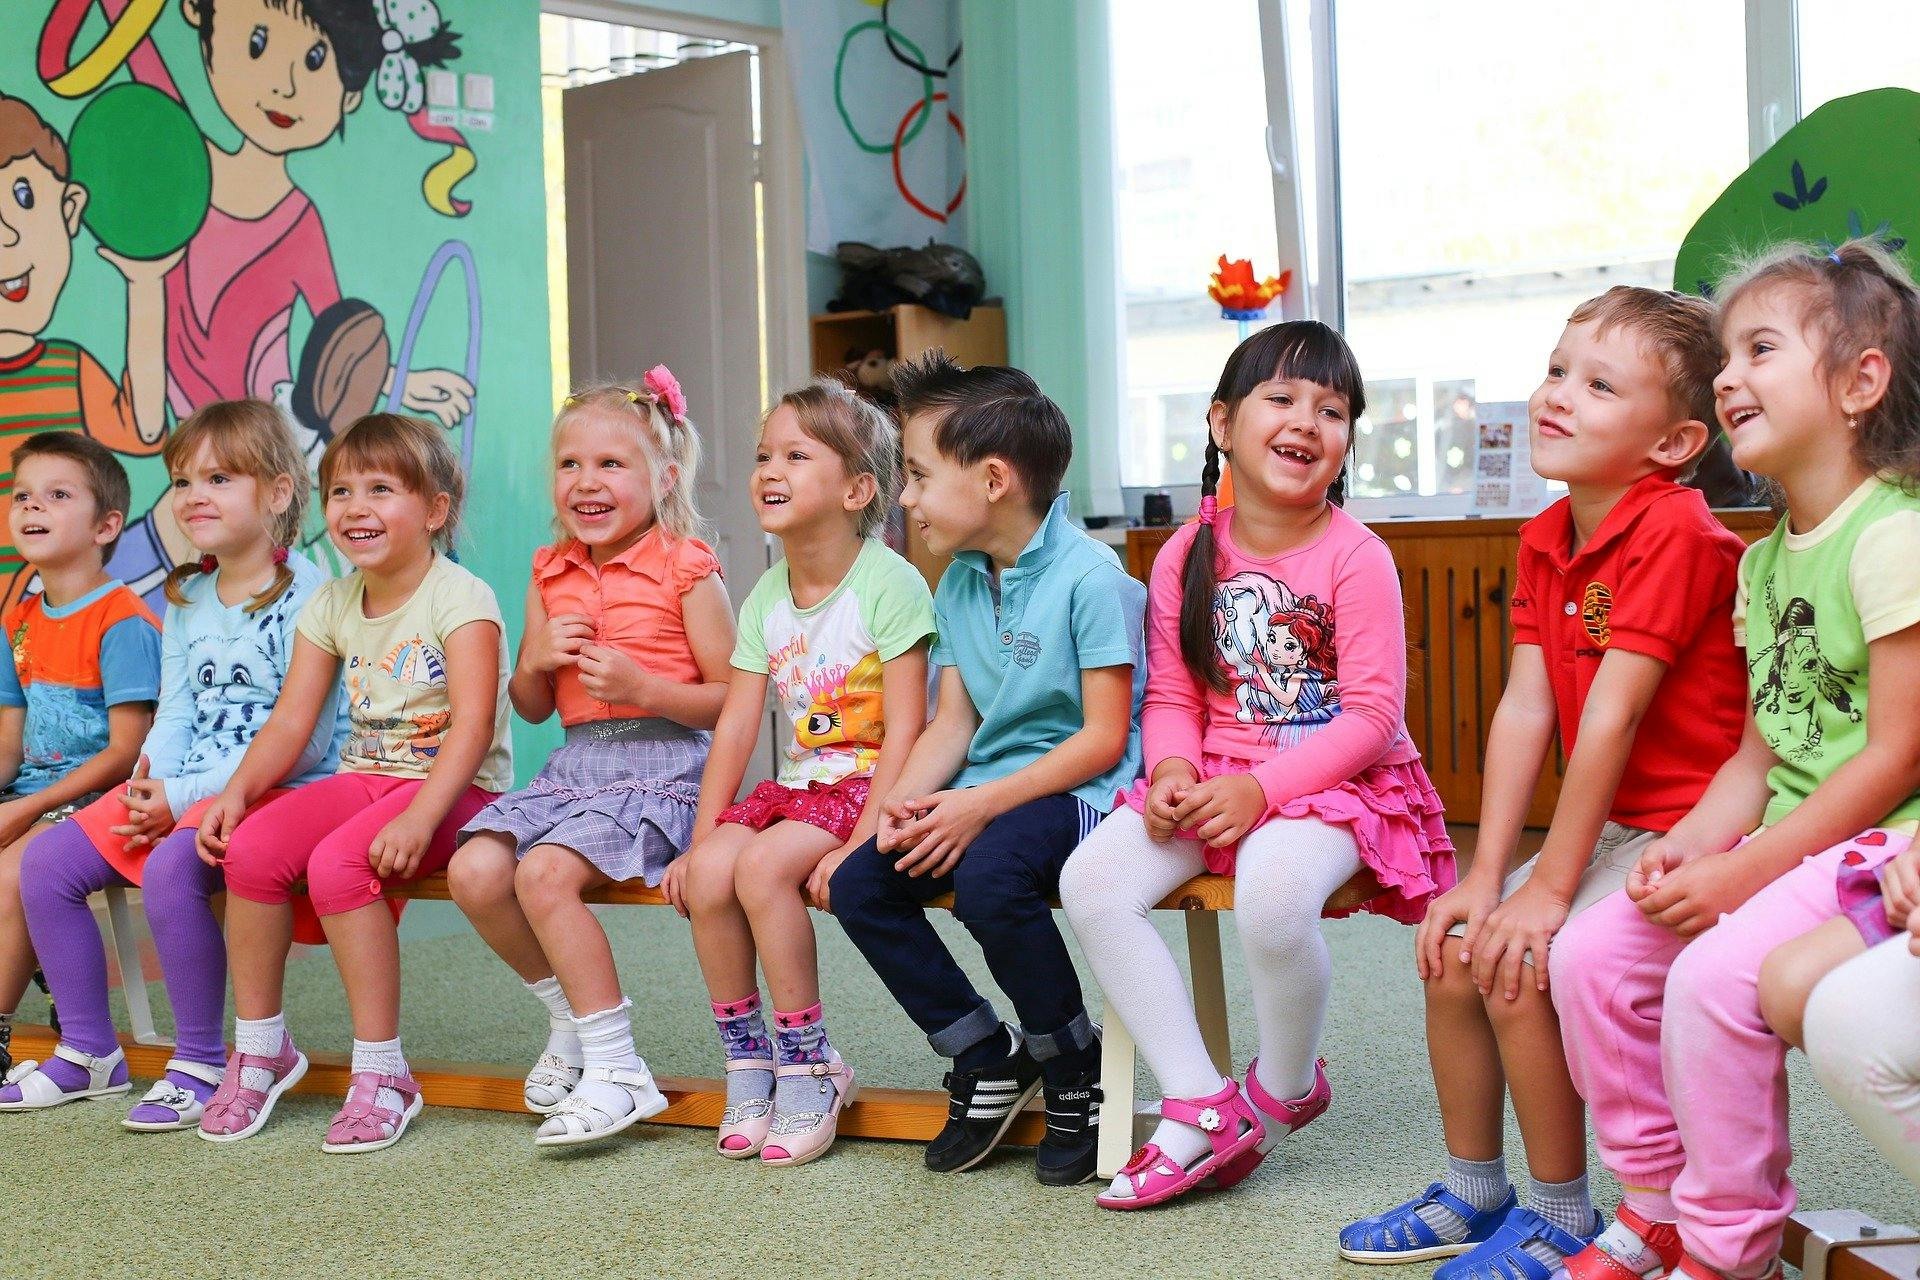 Nine kindergarten students sit in a row on wooden benches in a classroom.